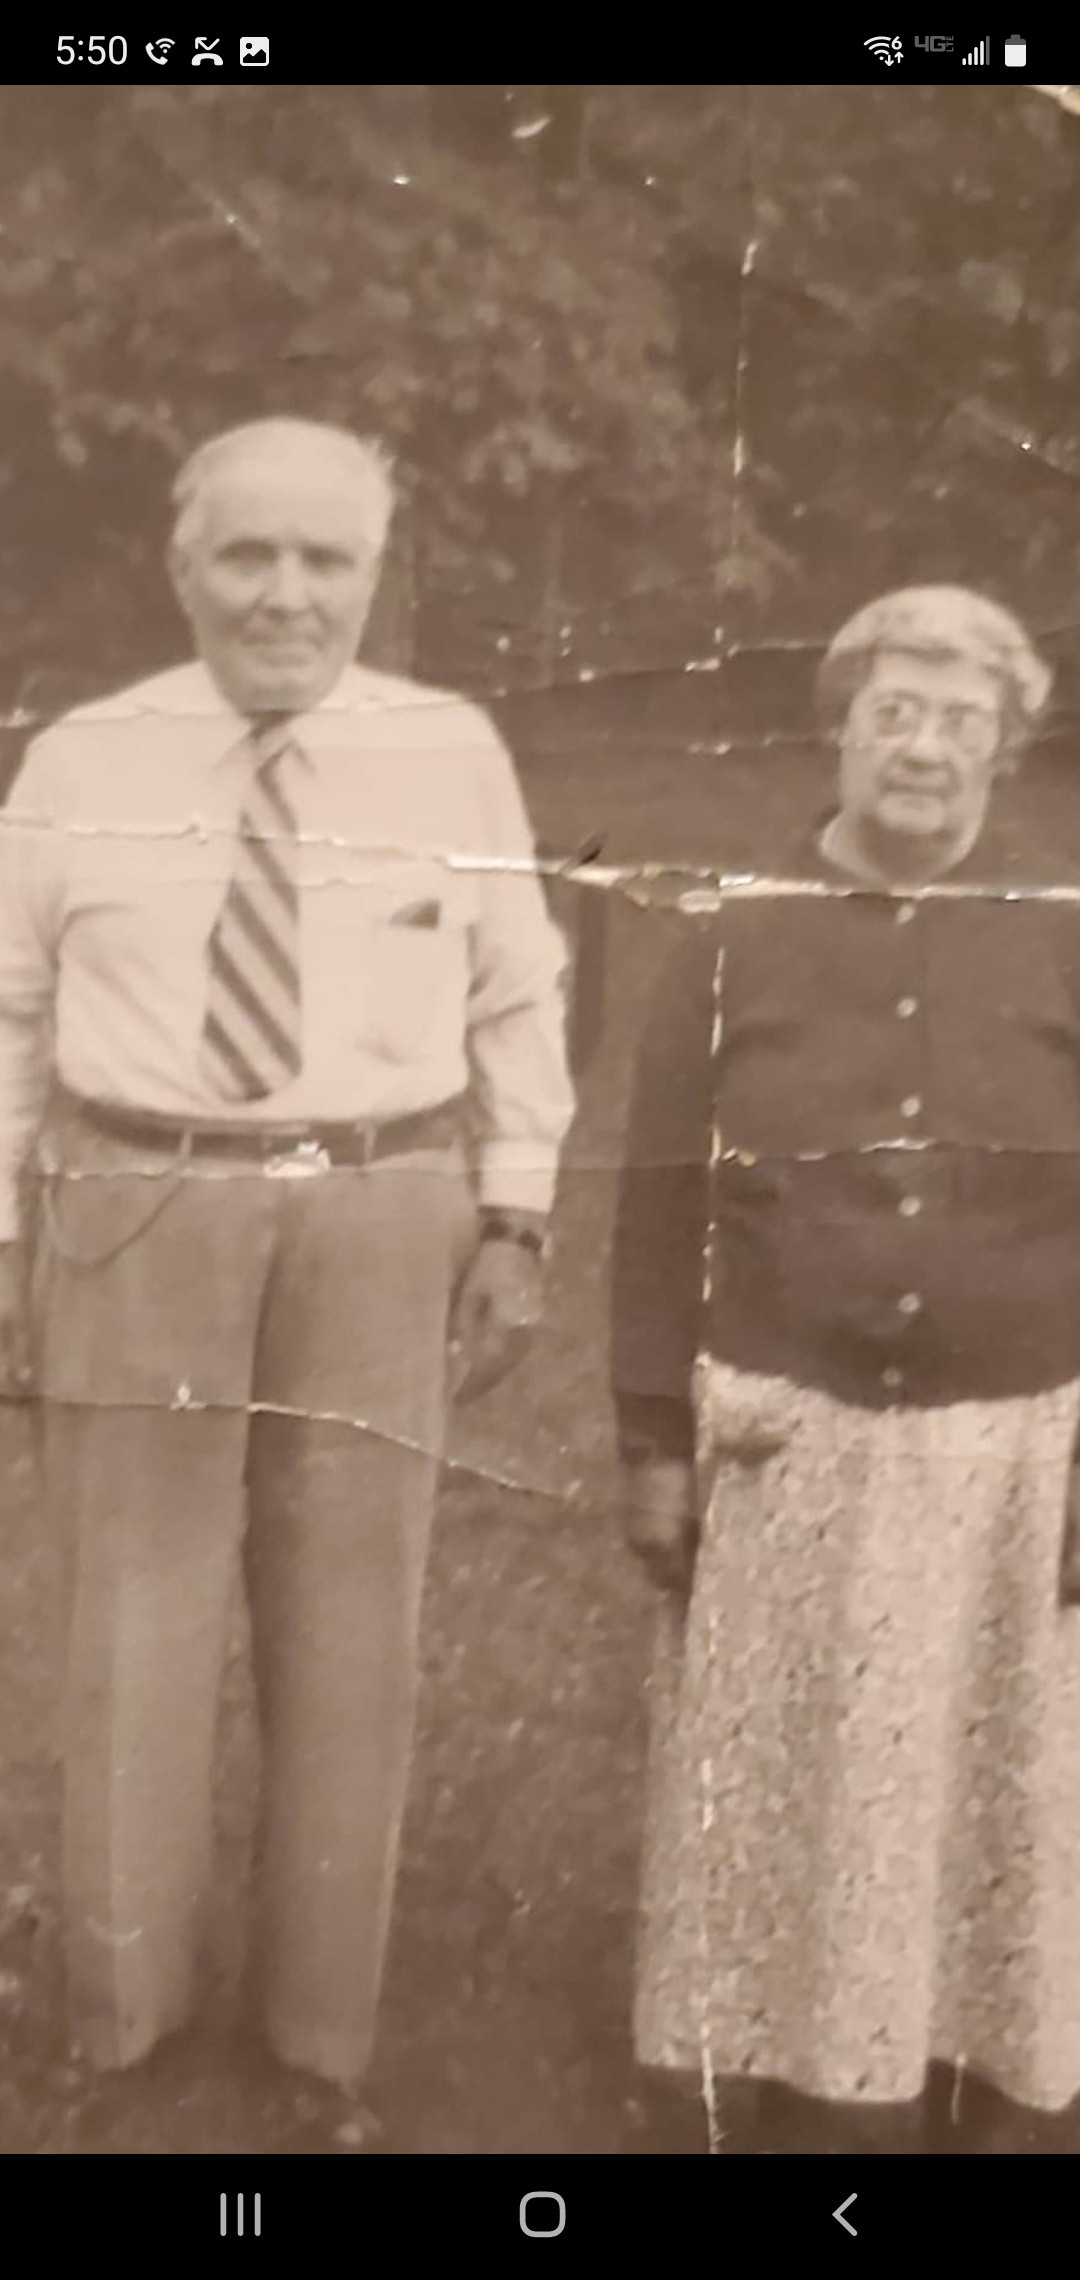 Andrew and his wife. My great grandparents